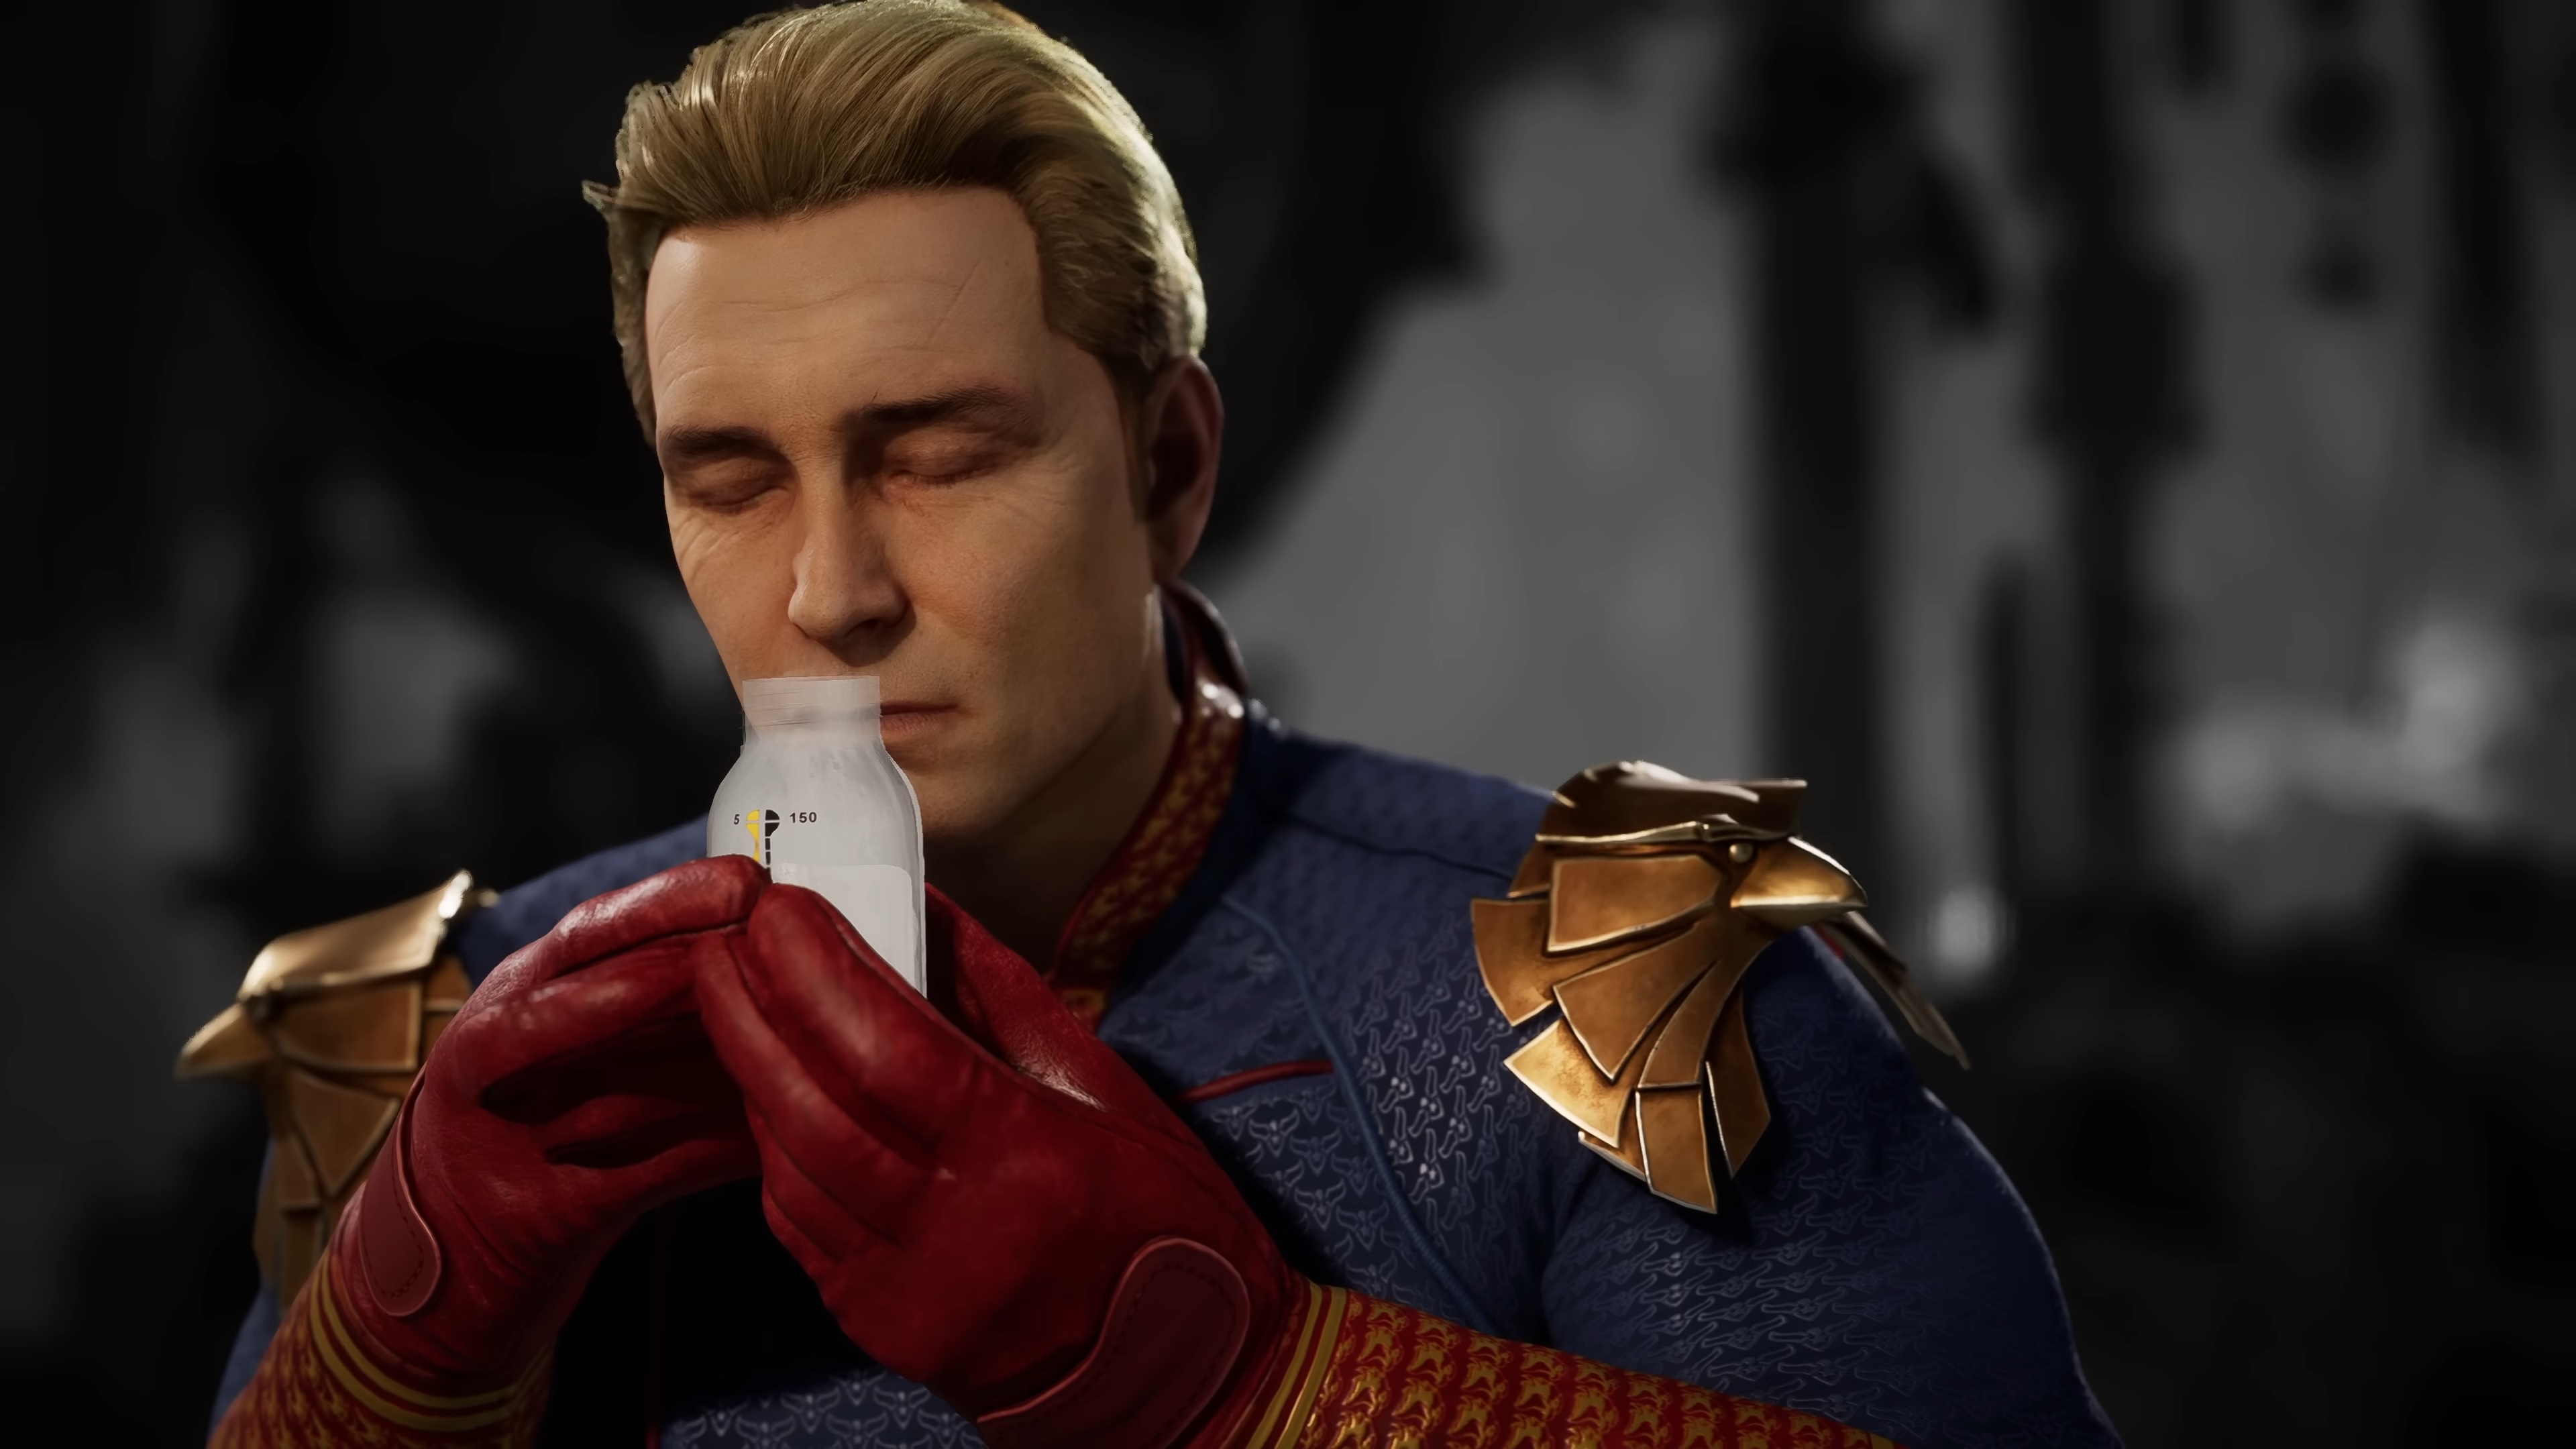  NetherRealm gives us a proper look at Homelander in Mortal Kombat 1's latest DLC trailer, and somehow the fatalities aren't the grossest thing in it 